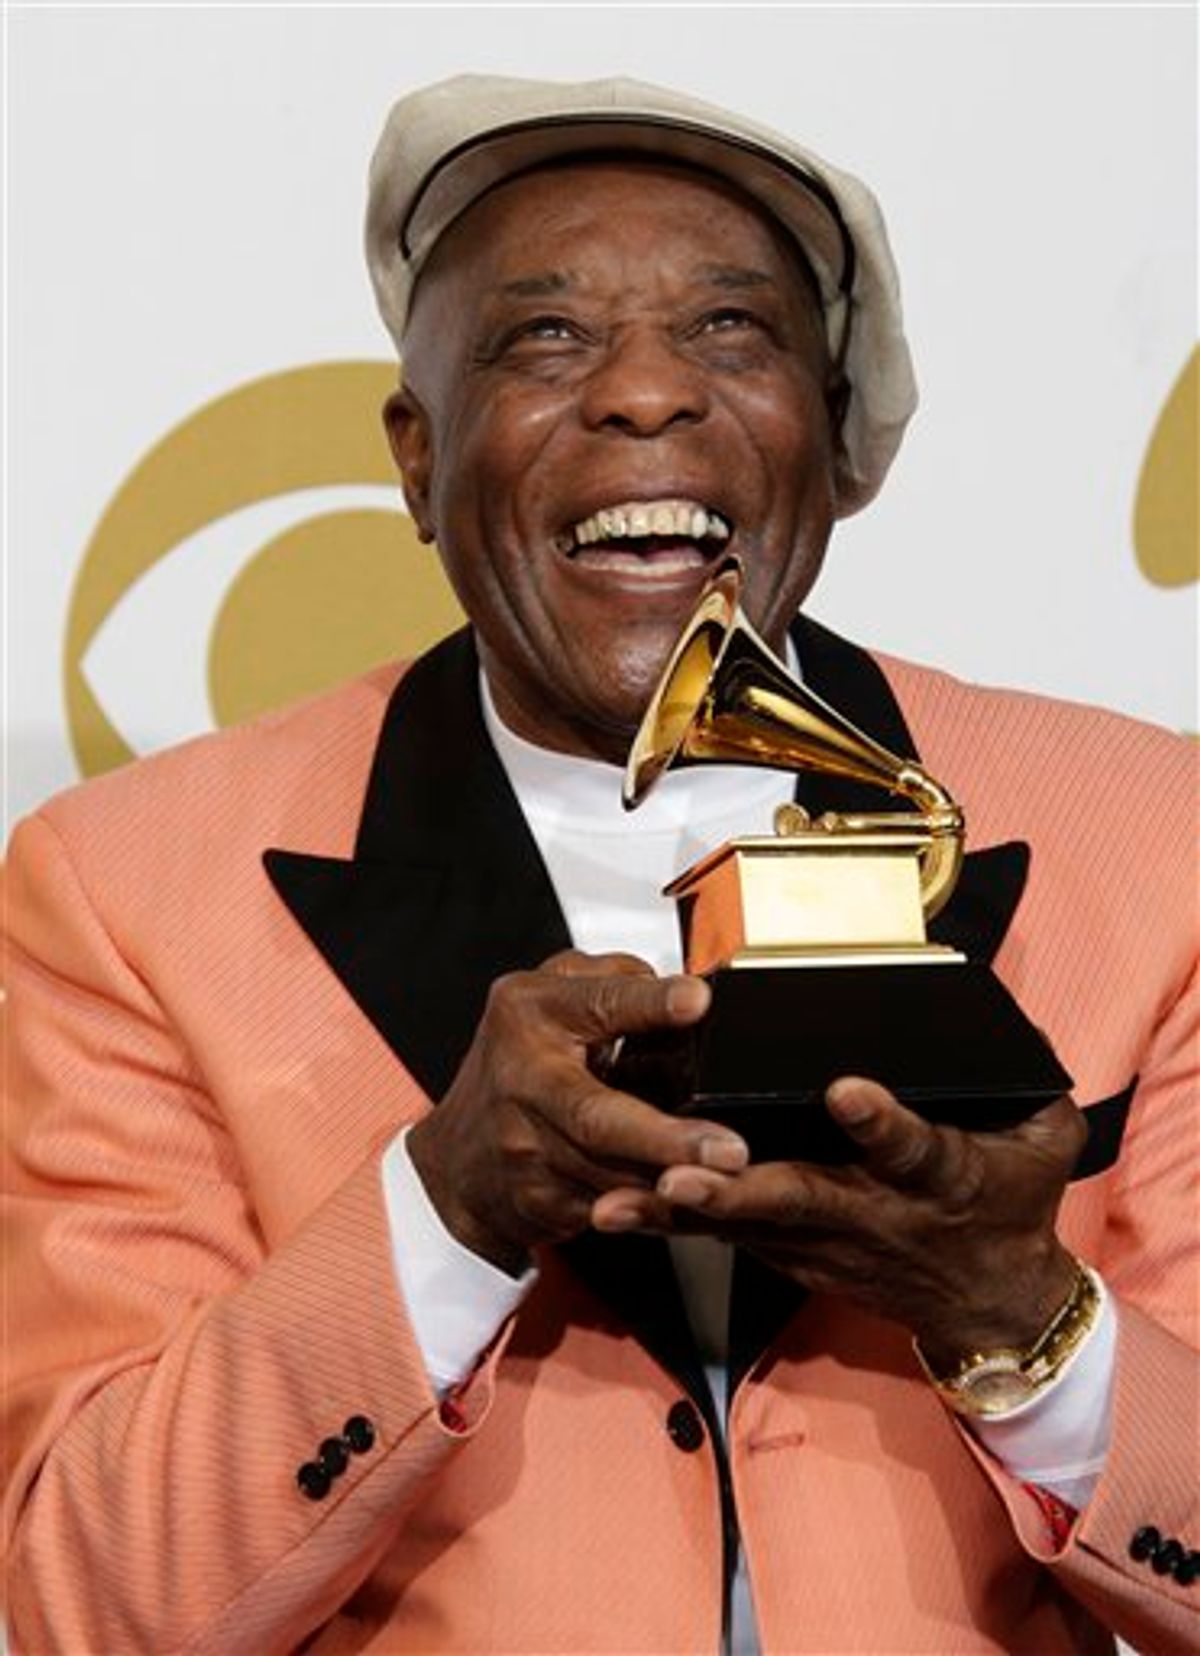 Buddy Guy poses backstage with the award for best contemporary blues album at the 53rd annual Grammy Awards on Sunday, Feb. 13, 2011, in Los Angeles. (AP Photo/Jae C. Hong) (AP)